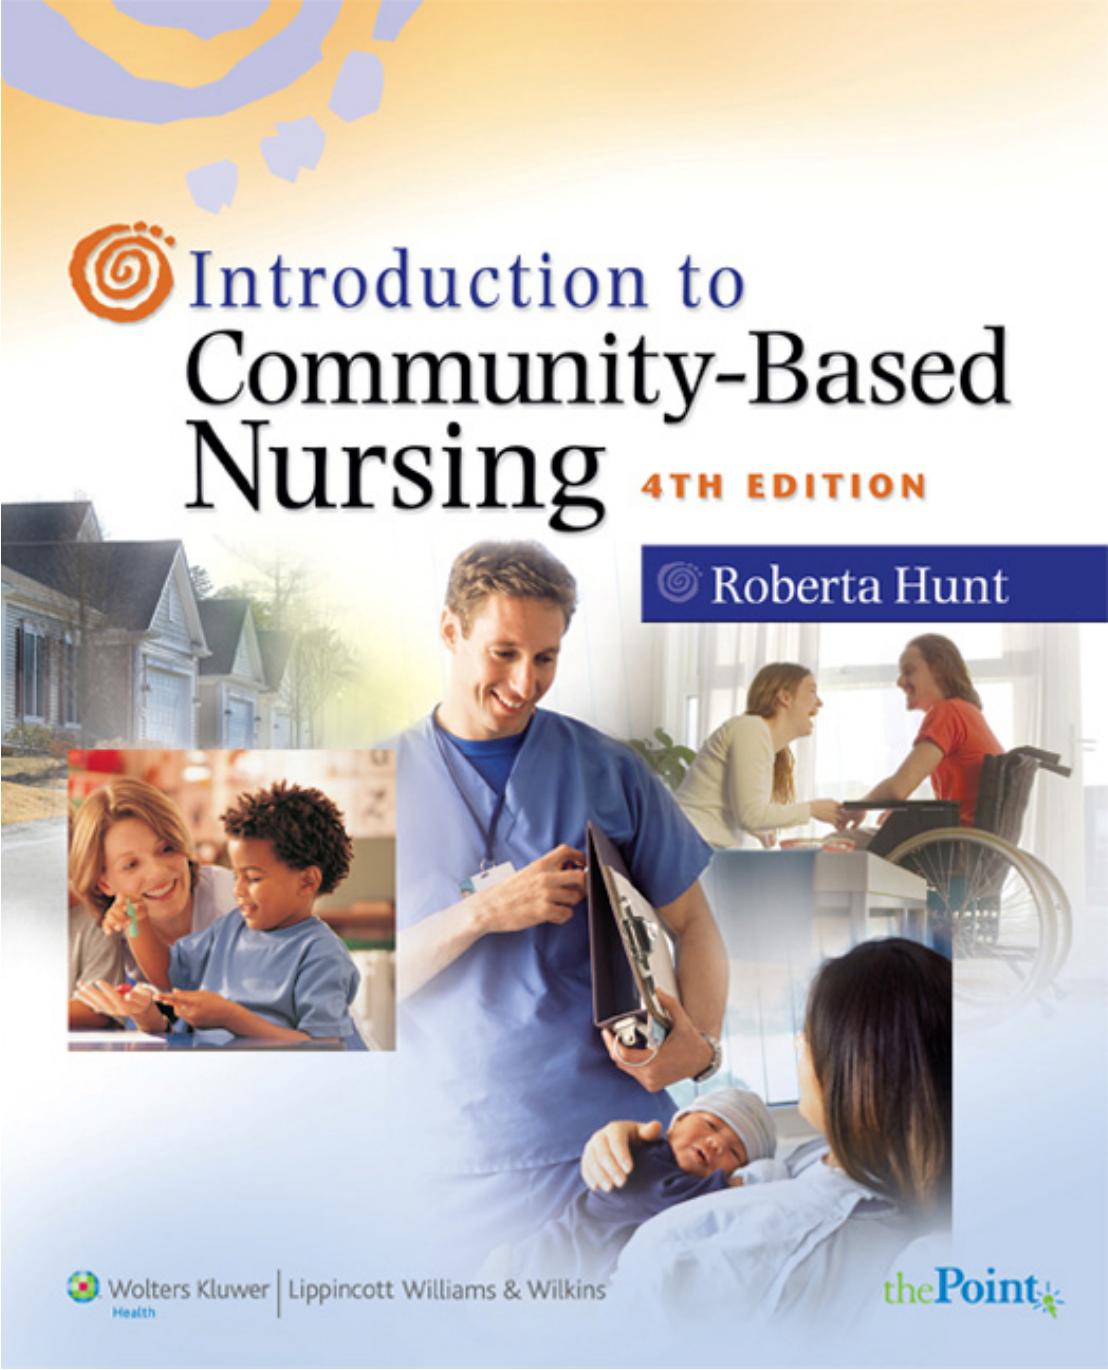 Introduction to Community-Based Nursing, 4th Edition